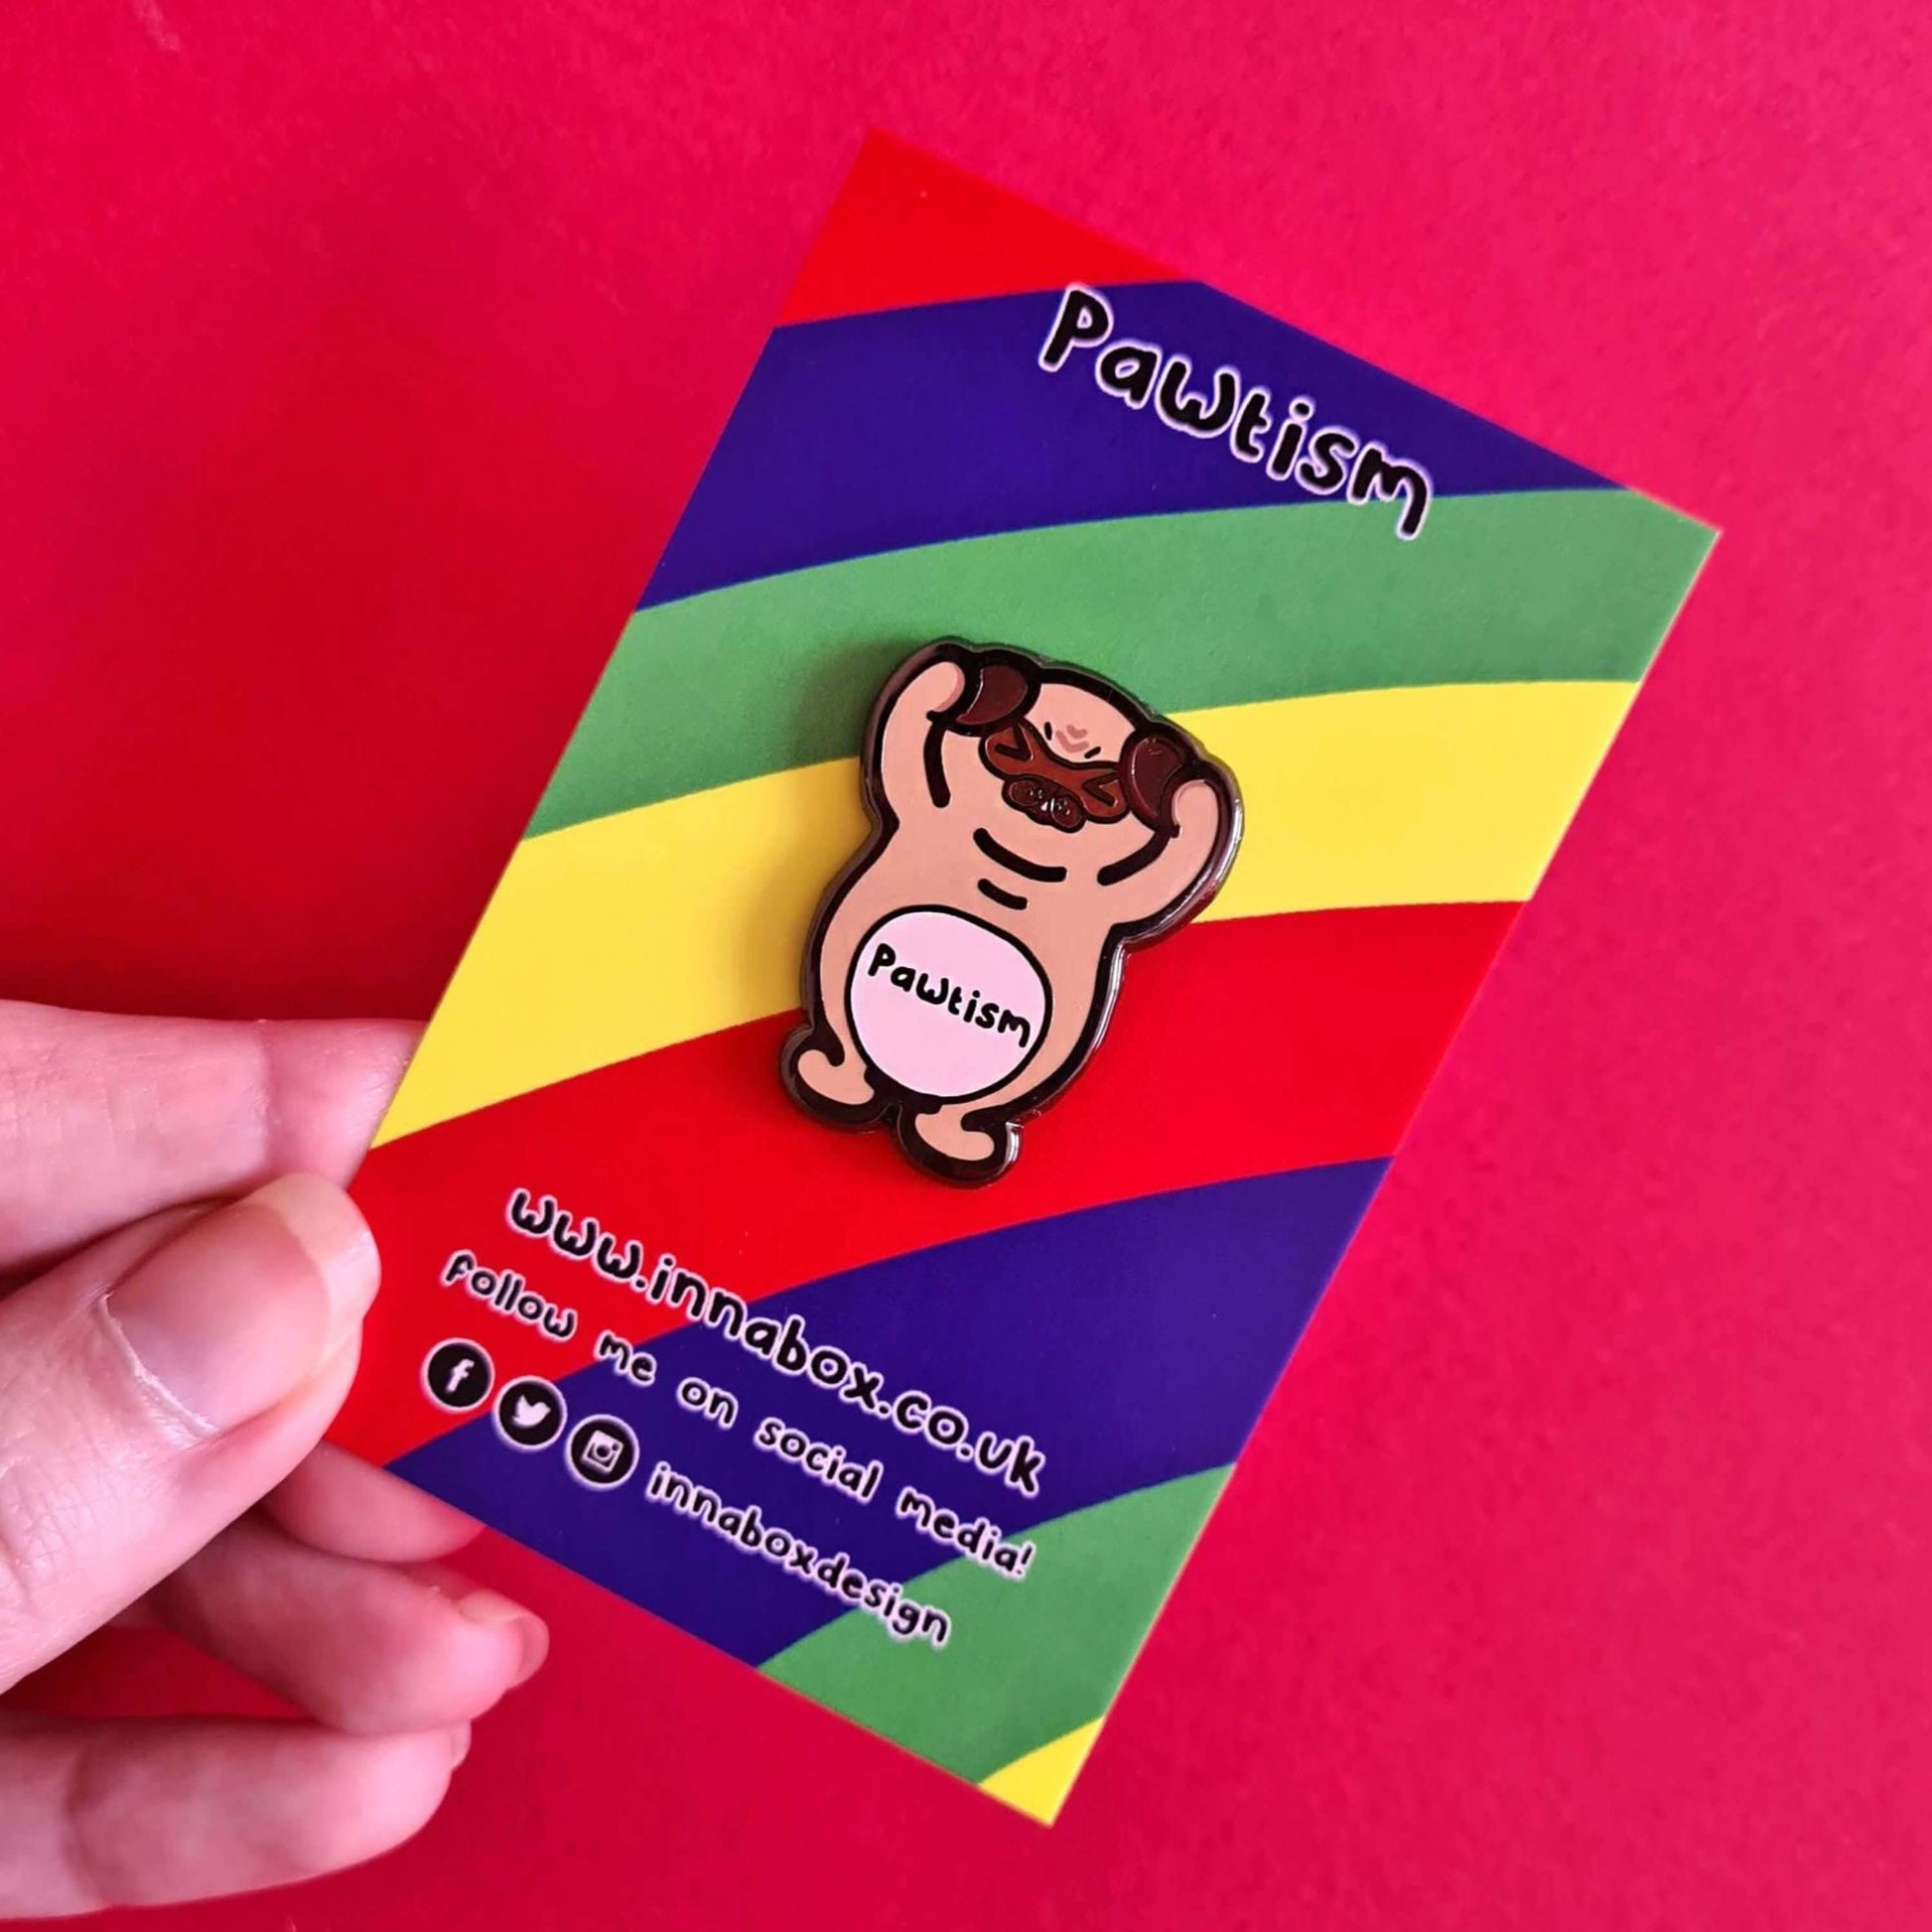 Pawtism Enamel Pin - Autism on rainbow backing card held by a hand on a red background. The enamel pin is of a brown pug with its hands on its ears and the word pawtism written across its belly. The enamel pin is to raise awareness for neurodiversity and autism.